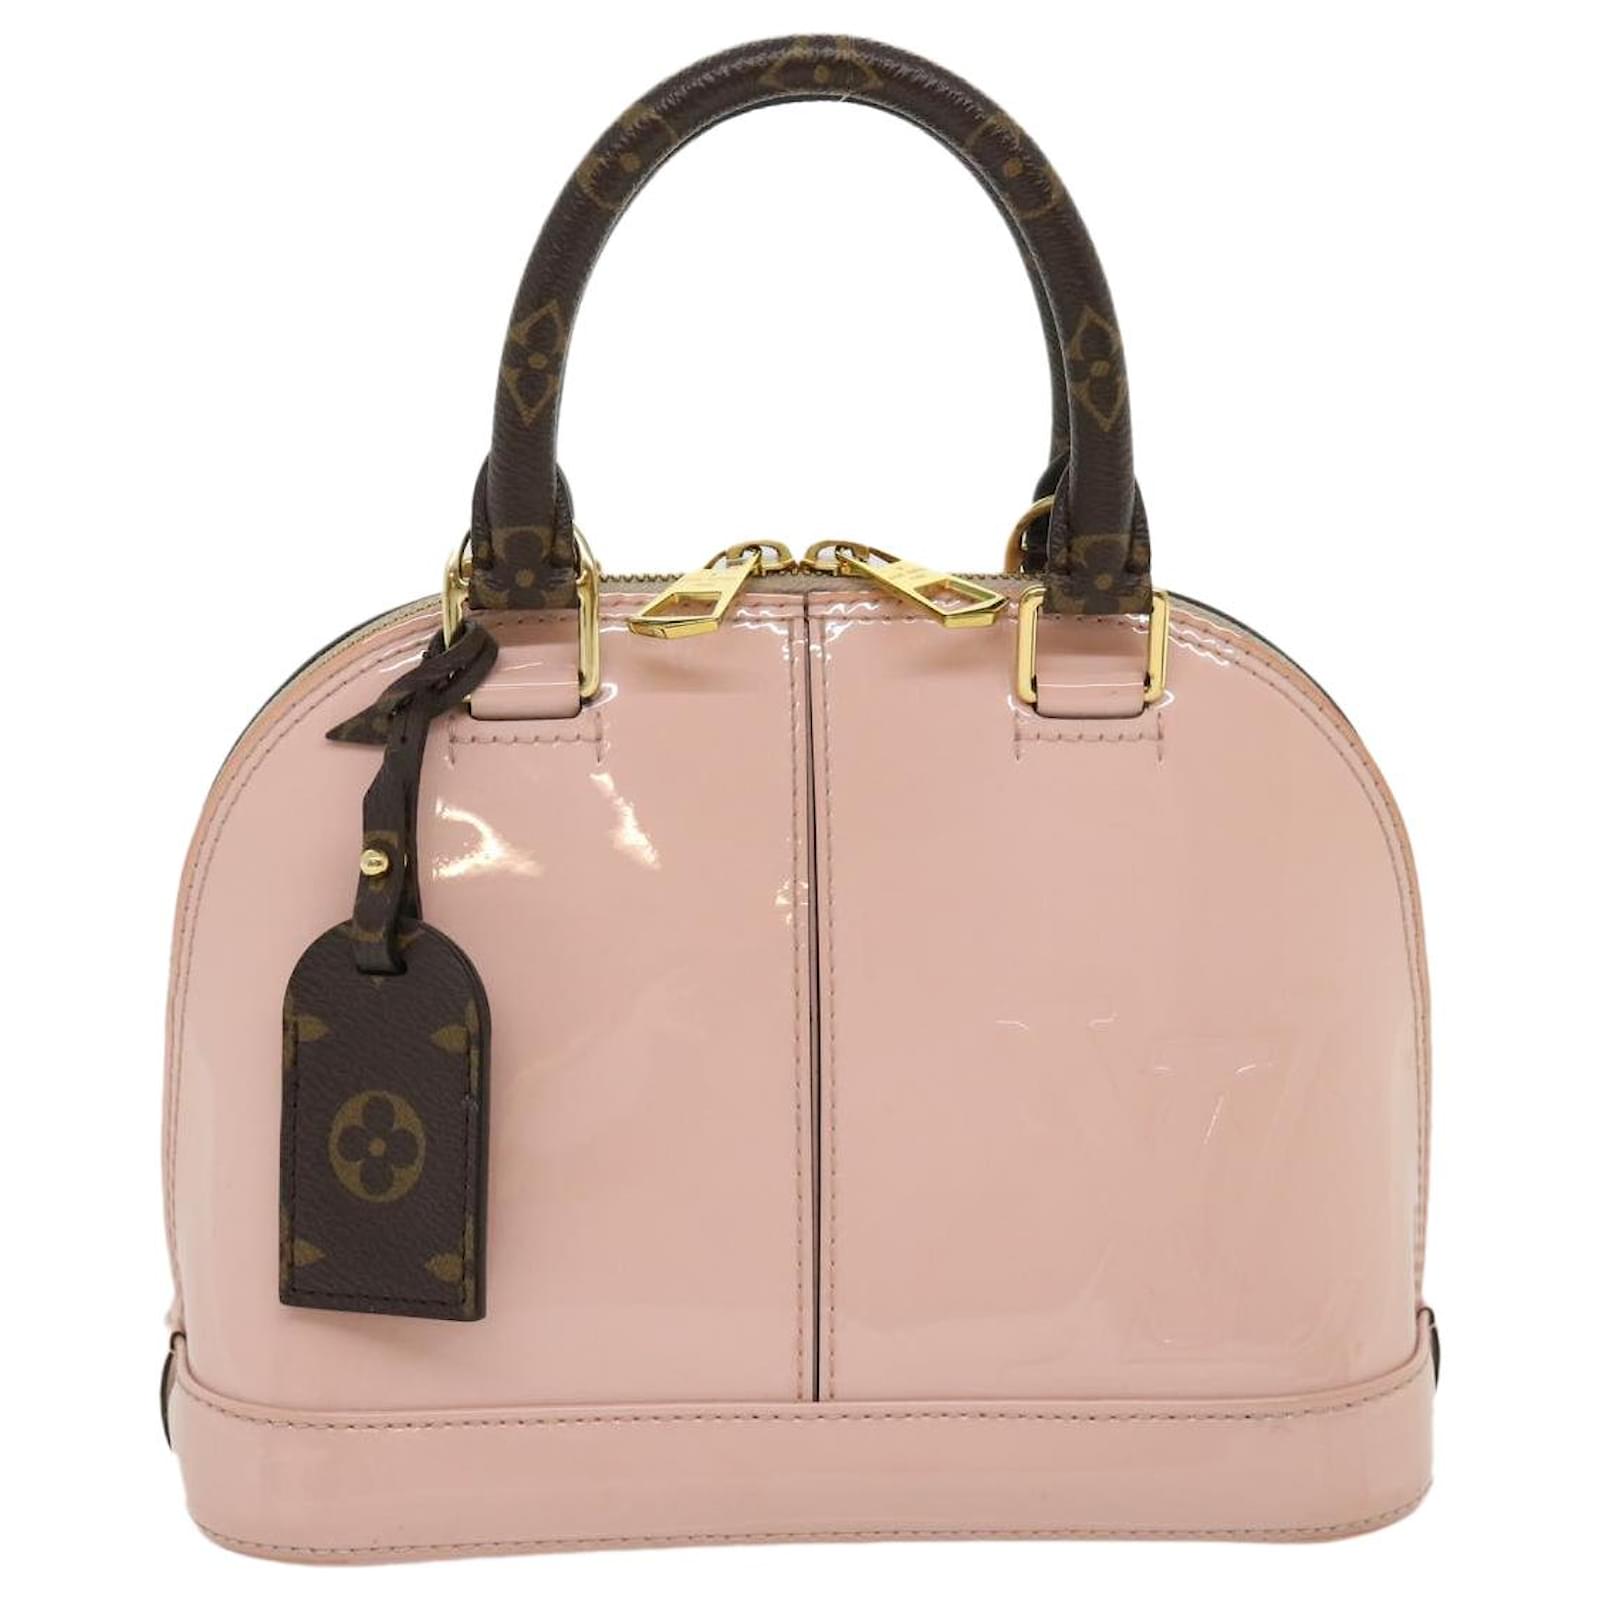 LOUIS VUITTON Vernis Rayures Alma BB Hand Bag 2way Beige Pink M90970 Auth  tp210A